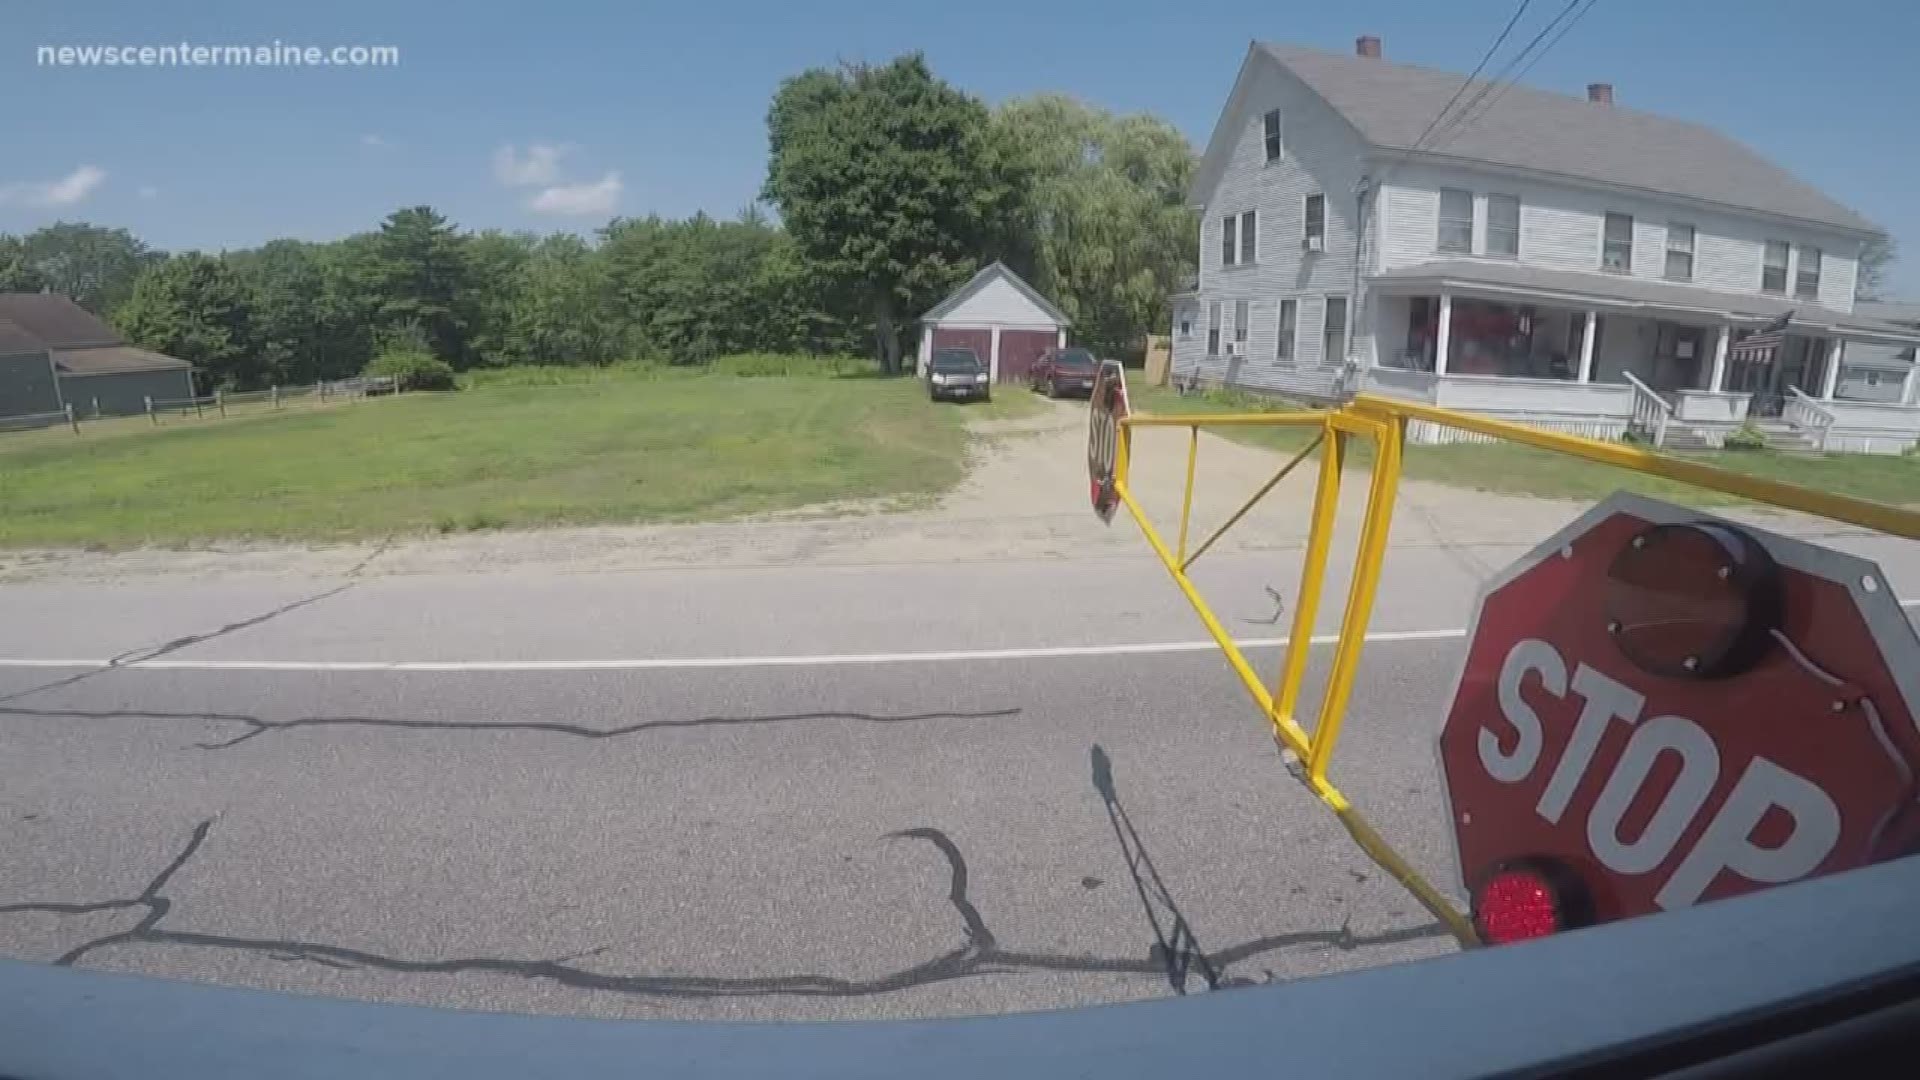 In Maine this past school year, there were reportedly 173 stop arm violations in one day, when drivers illegally passed a school bus.